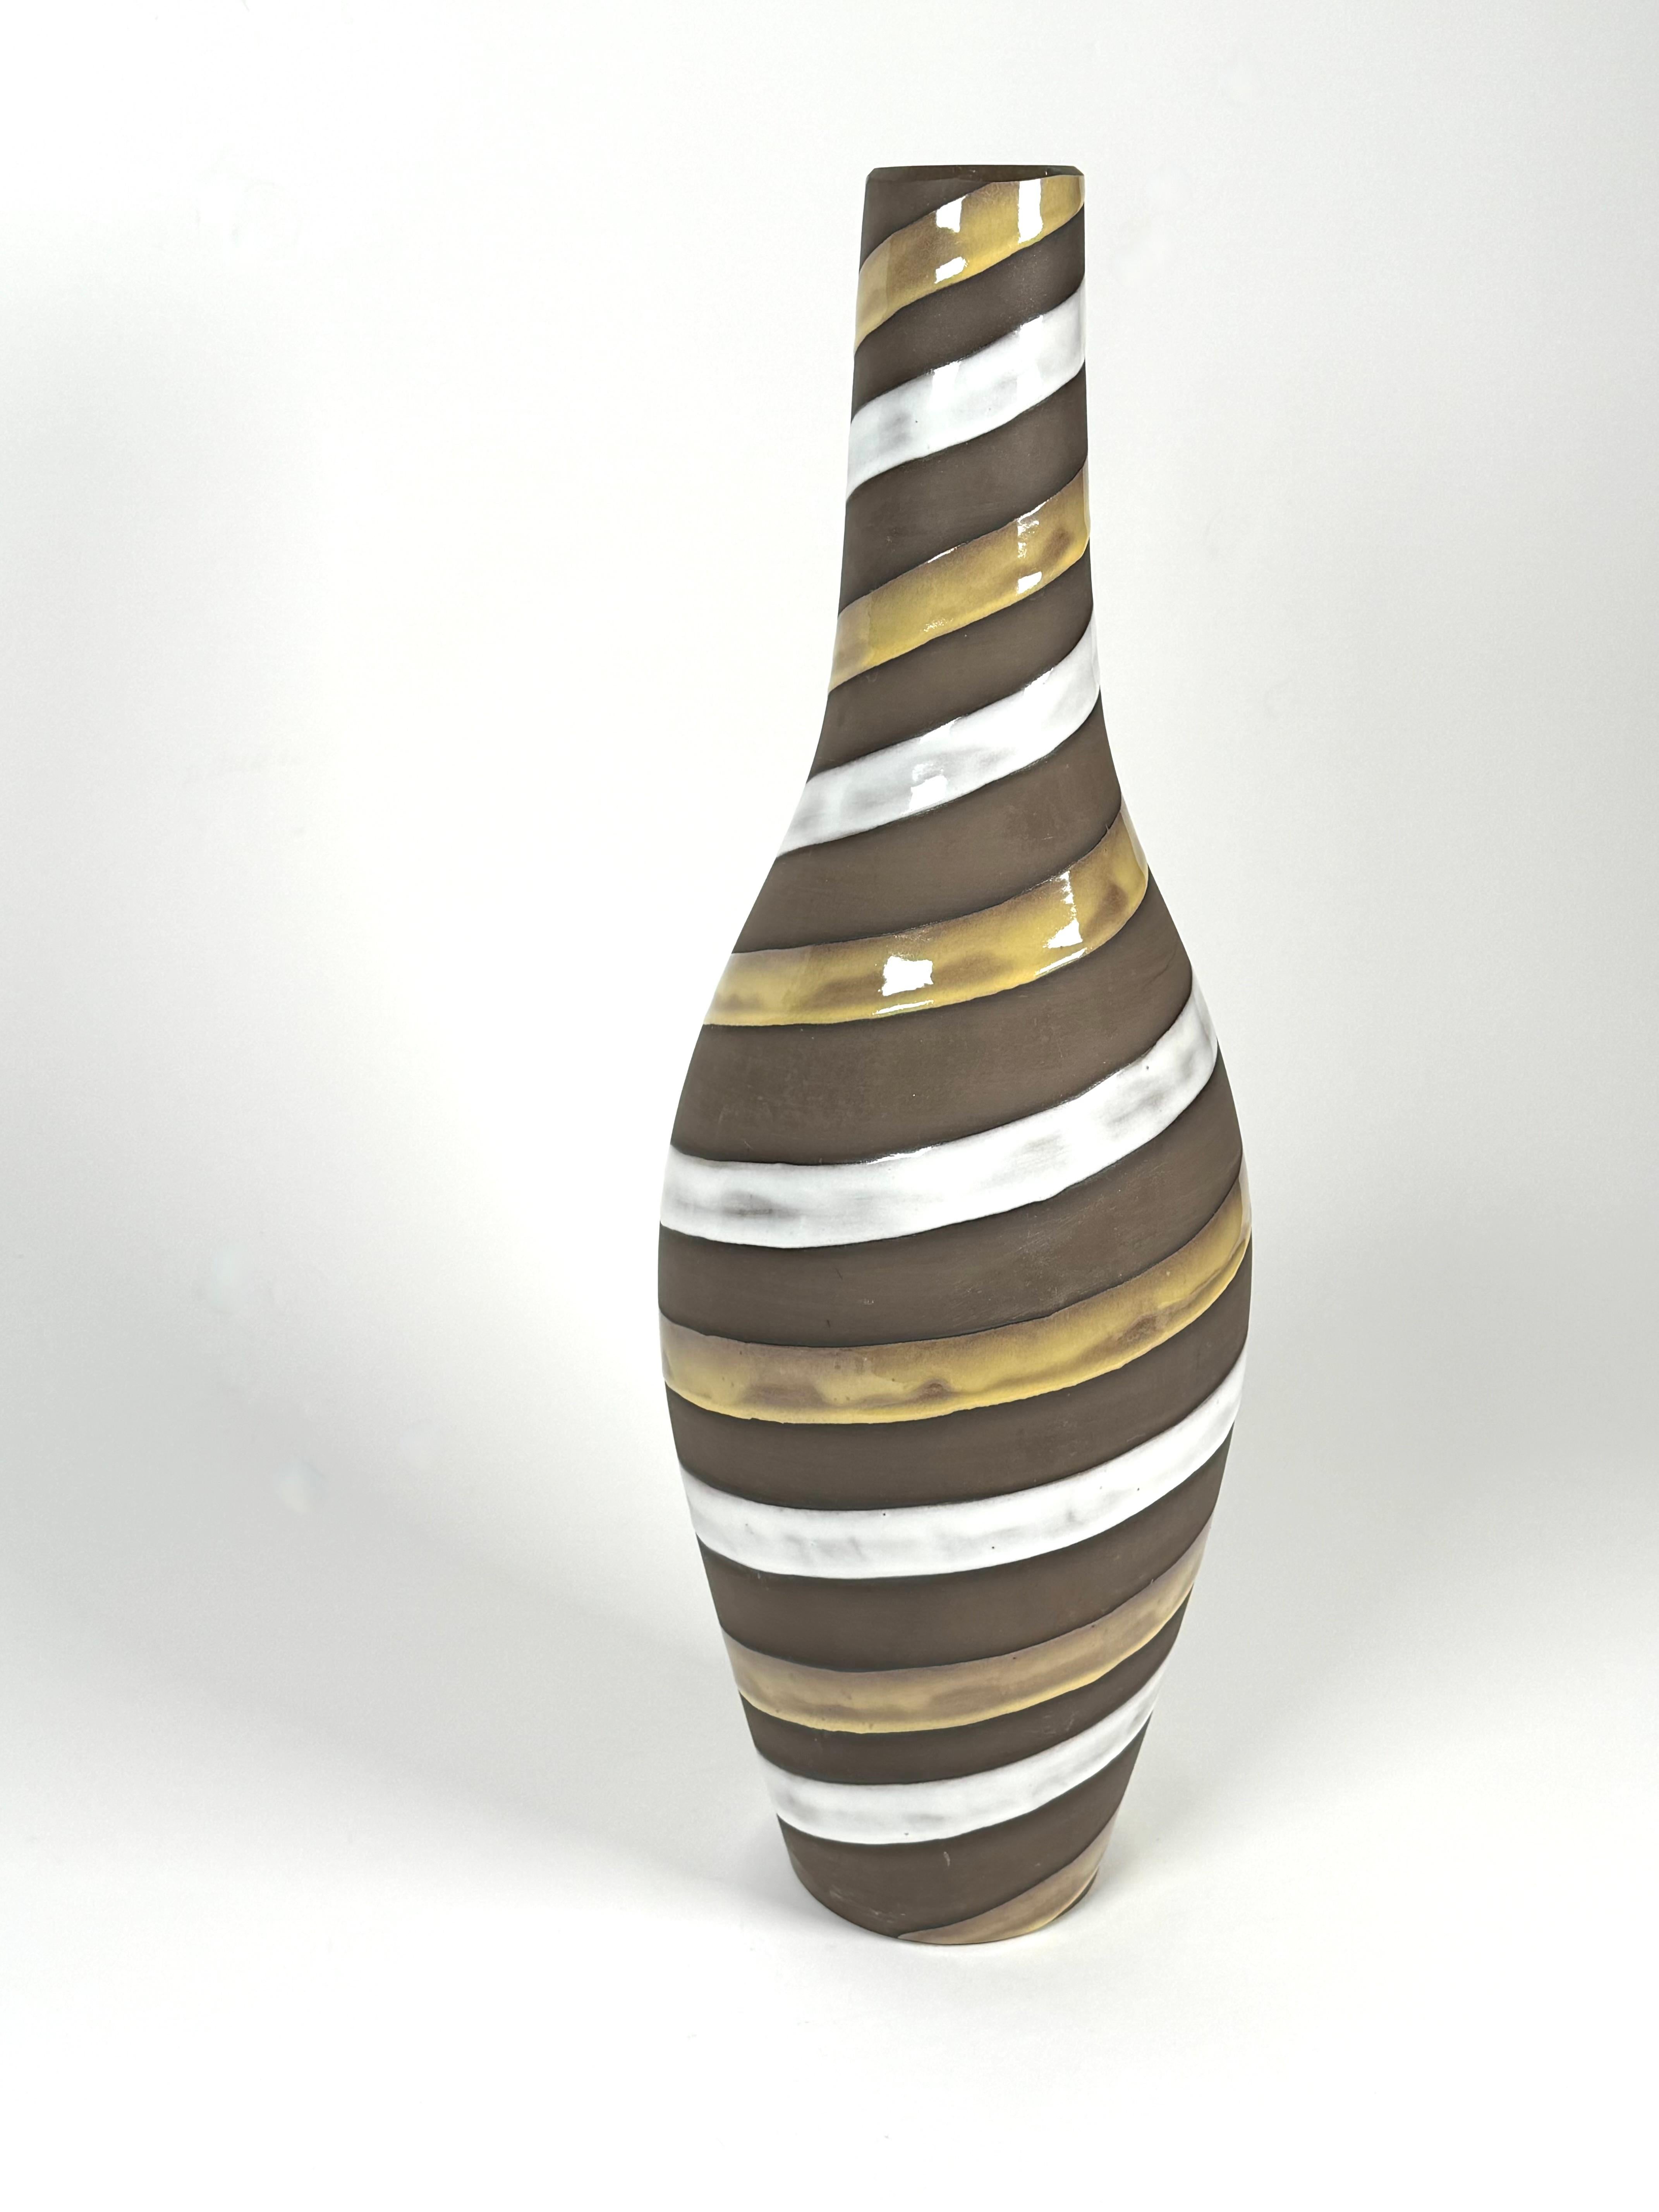 Studio ceramic tapered vase by artist Ingrid Atterberg (1920-2008) of Sweden. A tapered form with striped glazes running from the top to bottom of the vase, with an off white glaze and an earthy yellow glaze embellishing the soft earth toned mat